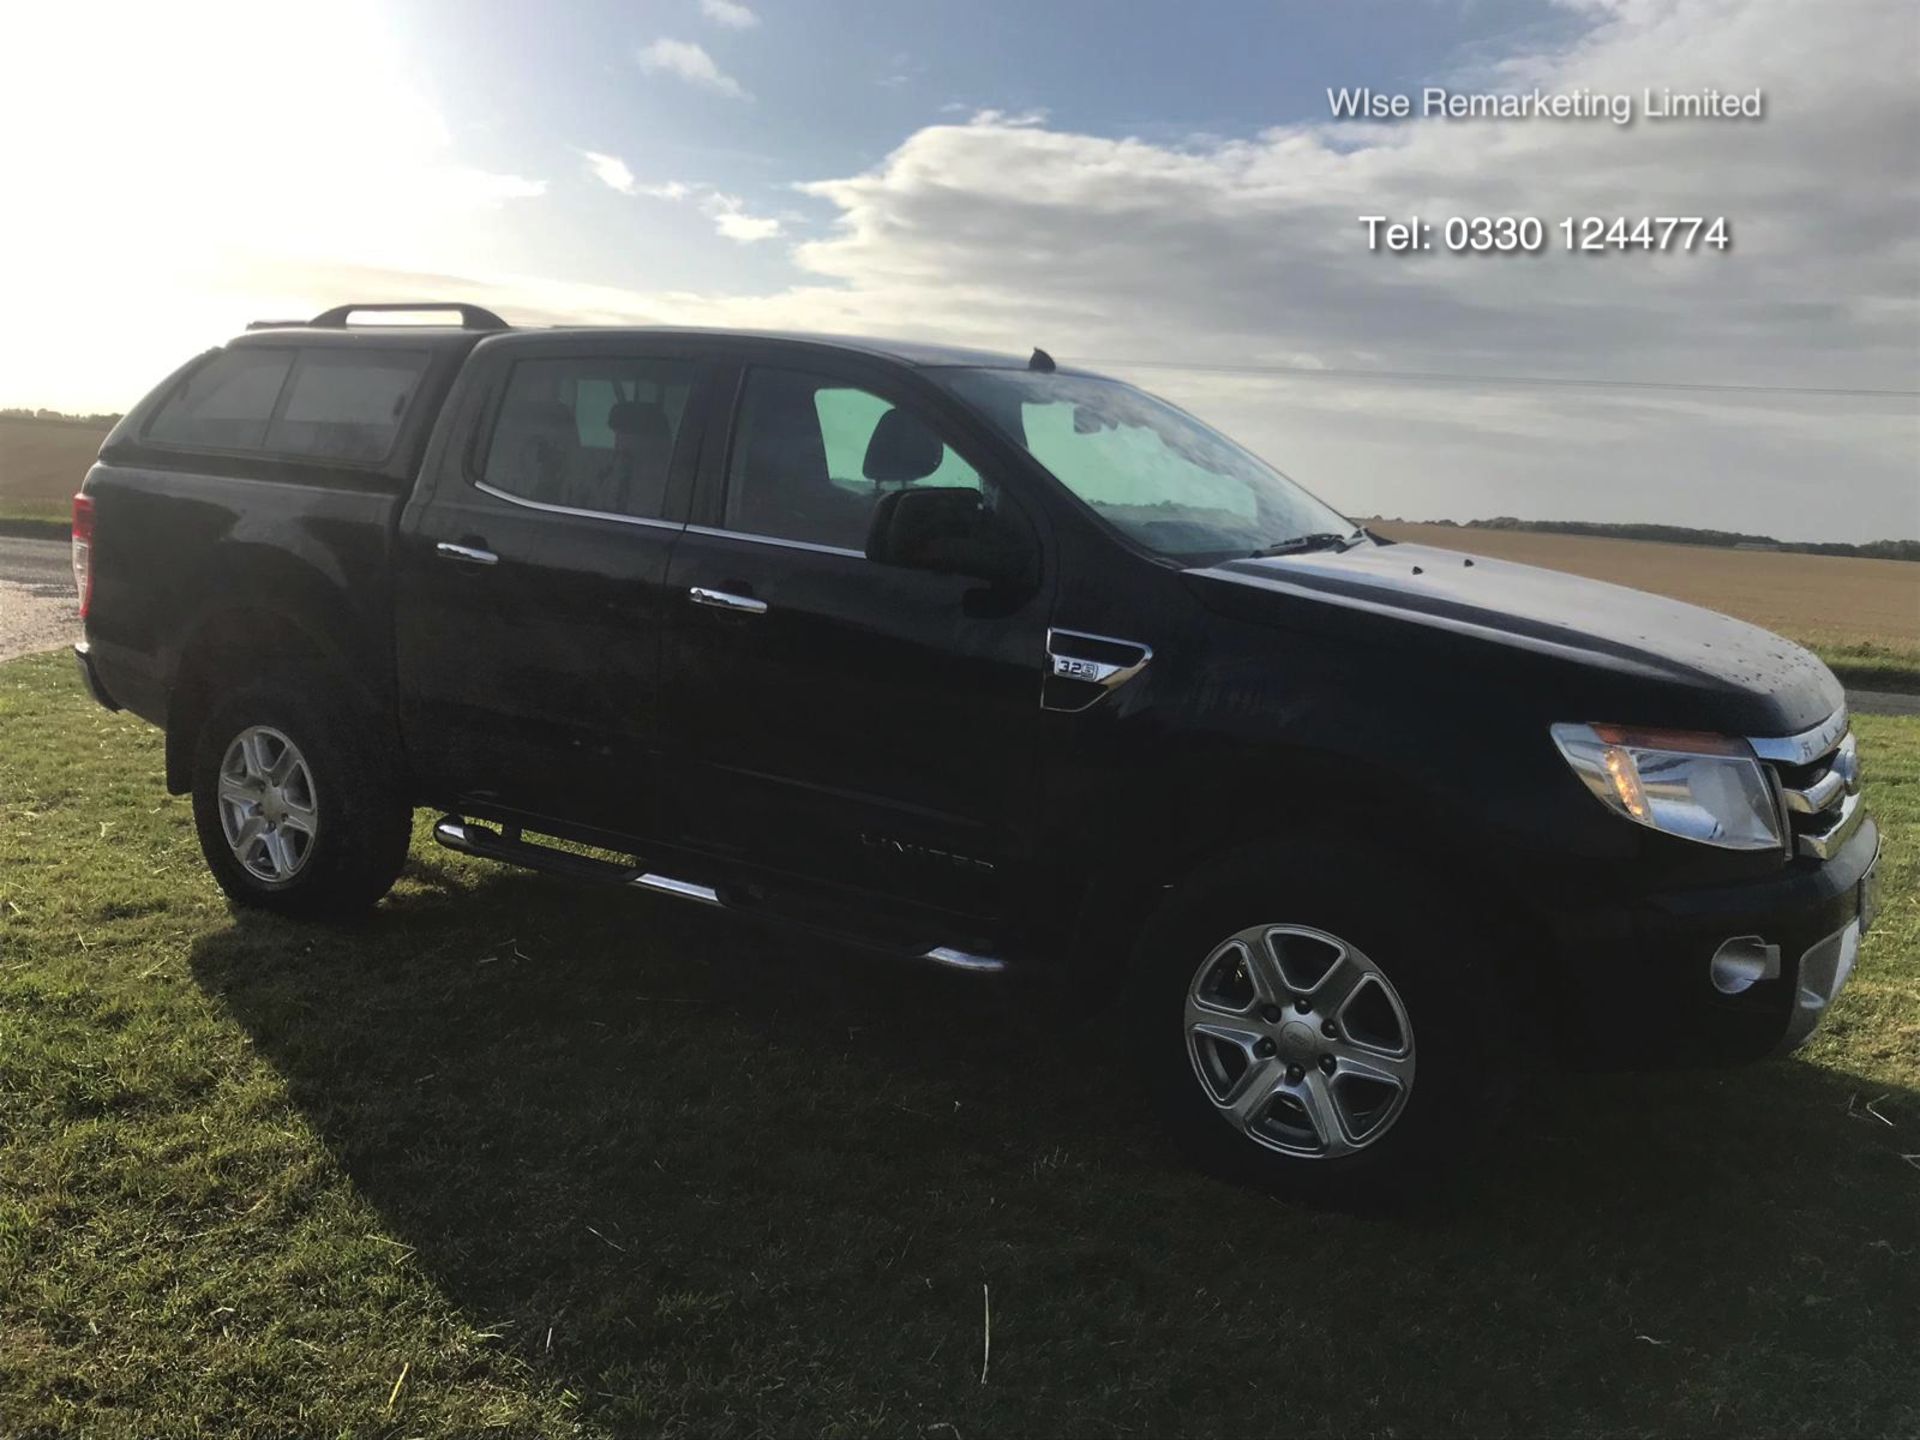 Ford Ranger 3.2l Tdci (200 BHP) Limited 4x4 - 2012 Model - Black - Double Cab - Image 2 of 18